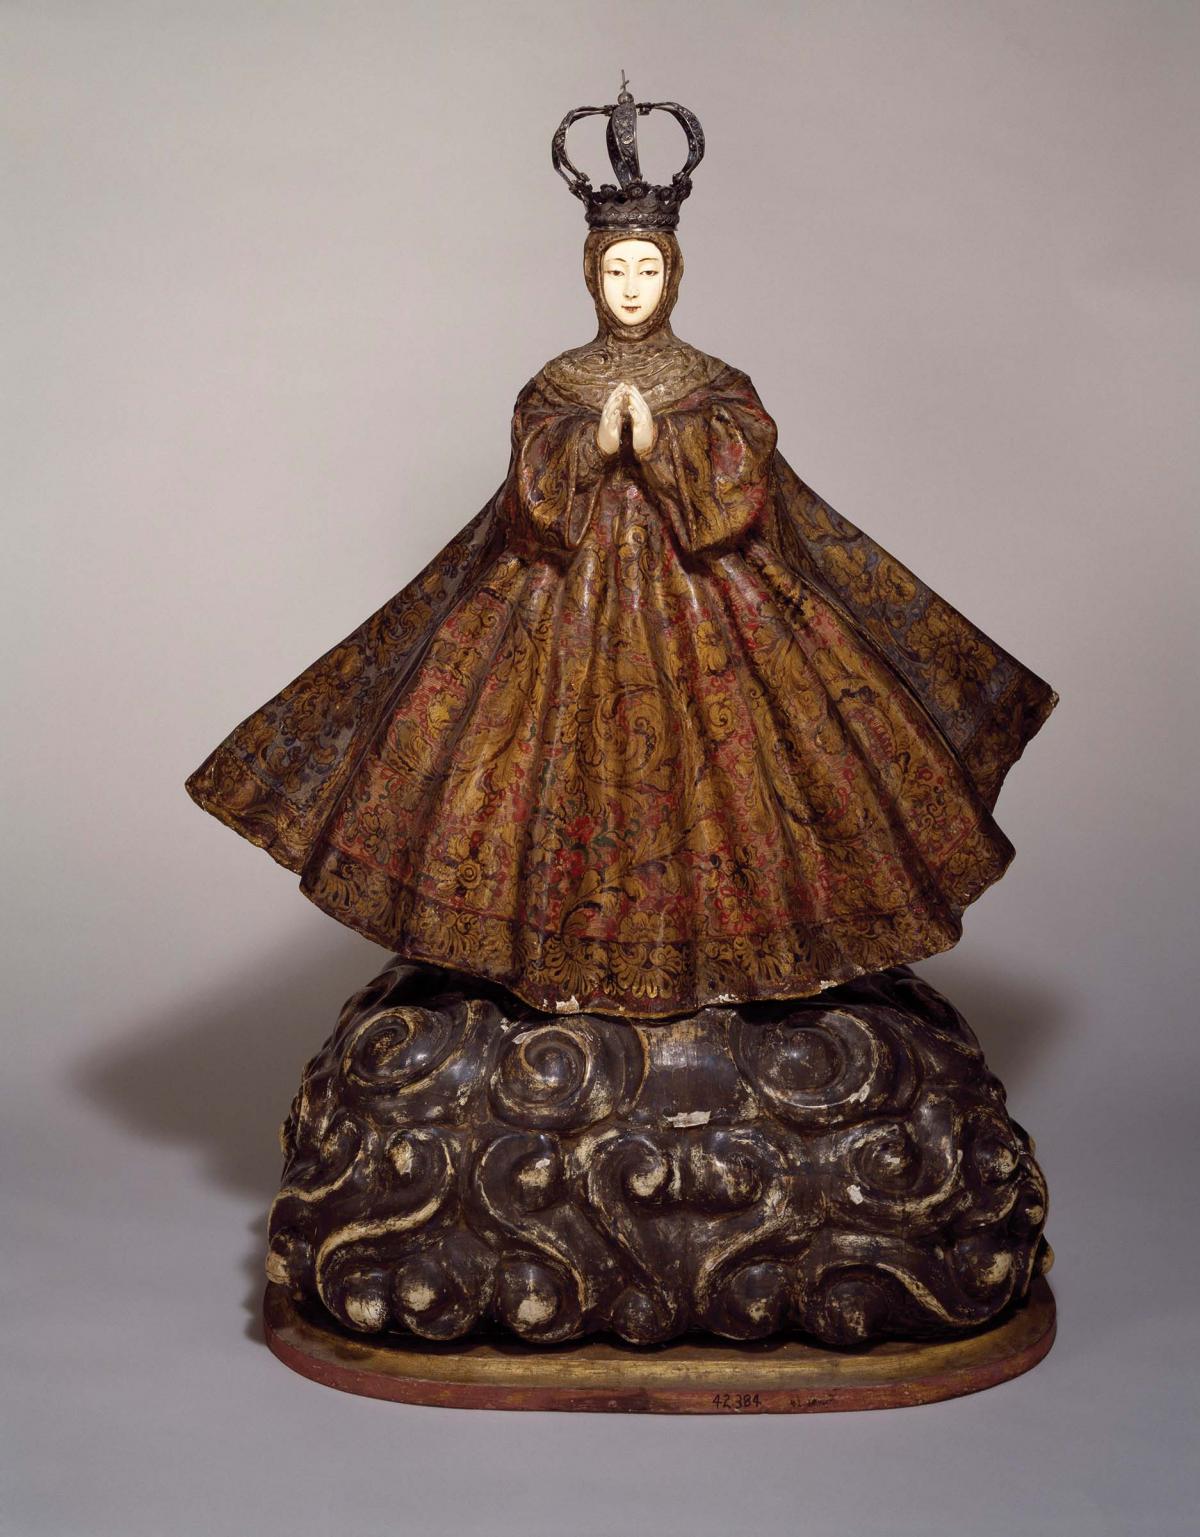 ivory statue of Mary, wearing a wide, brown, embroidered skirt and crown